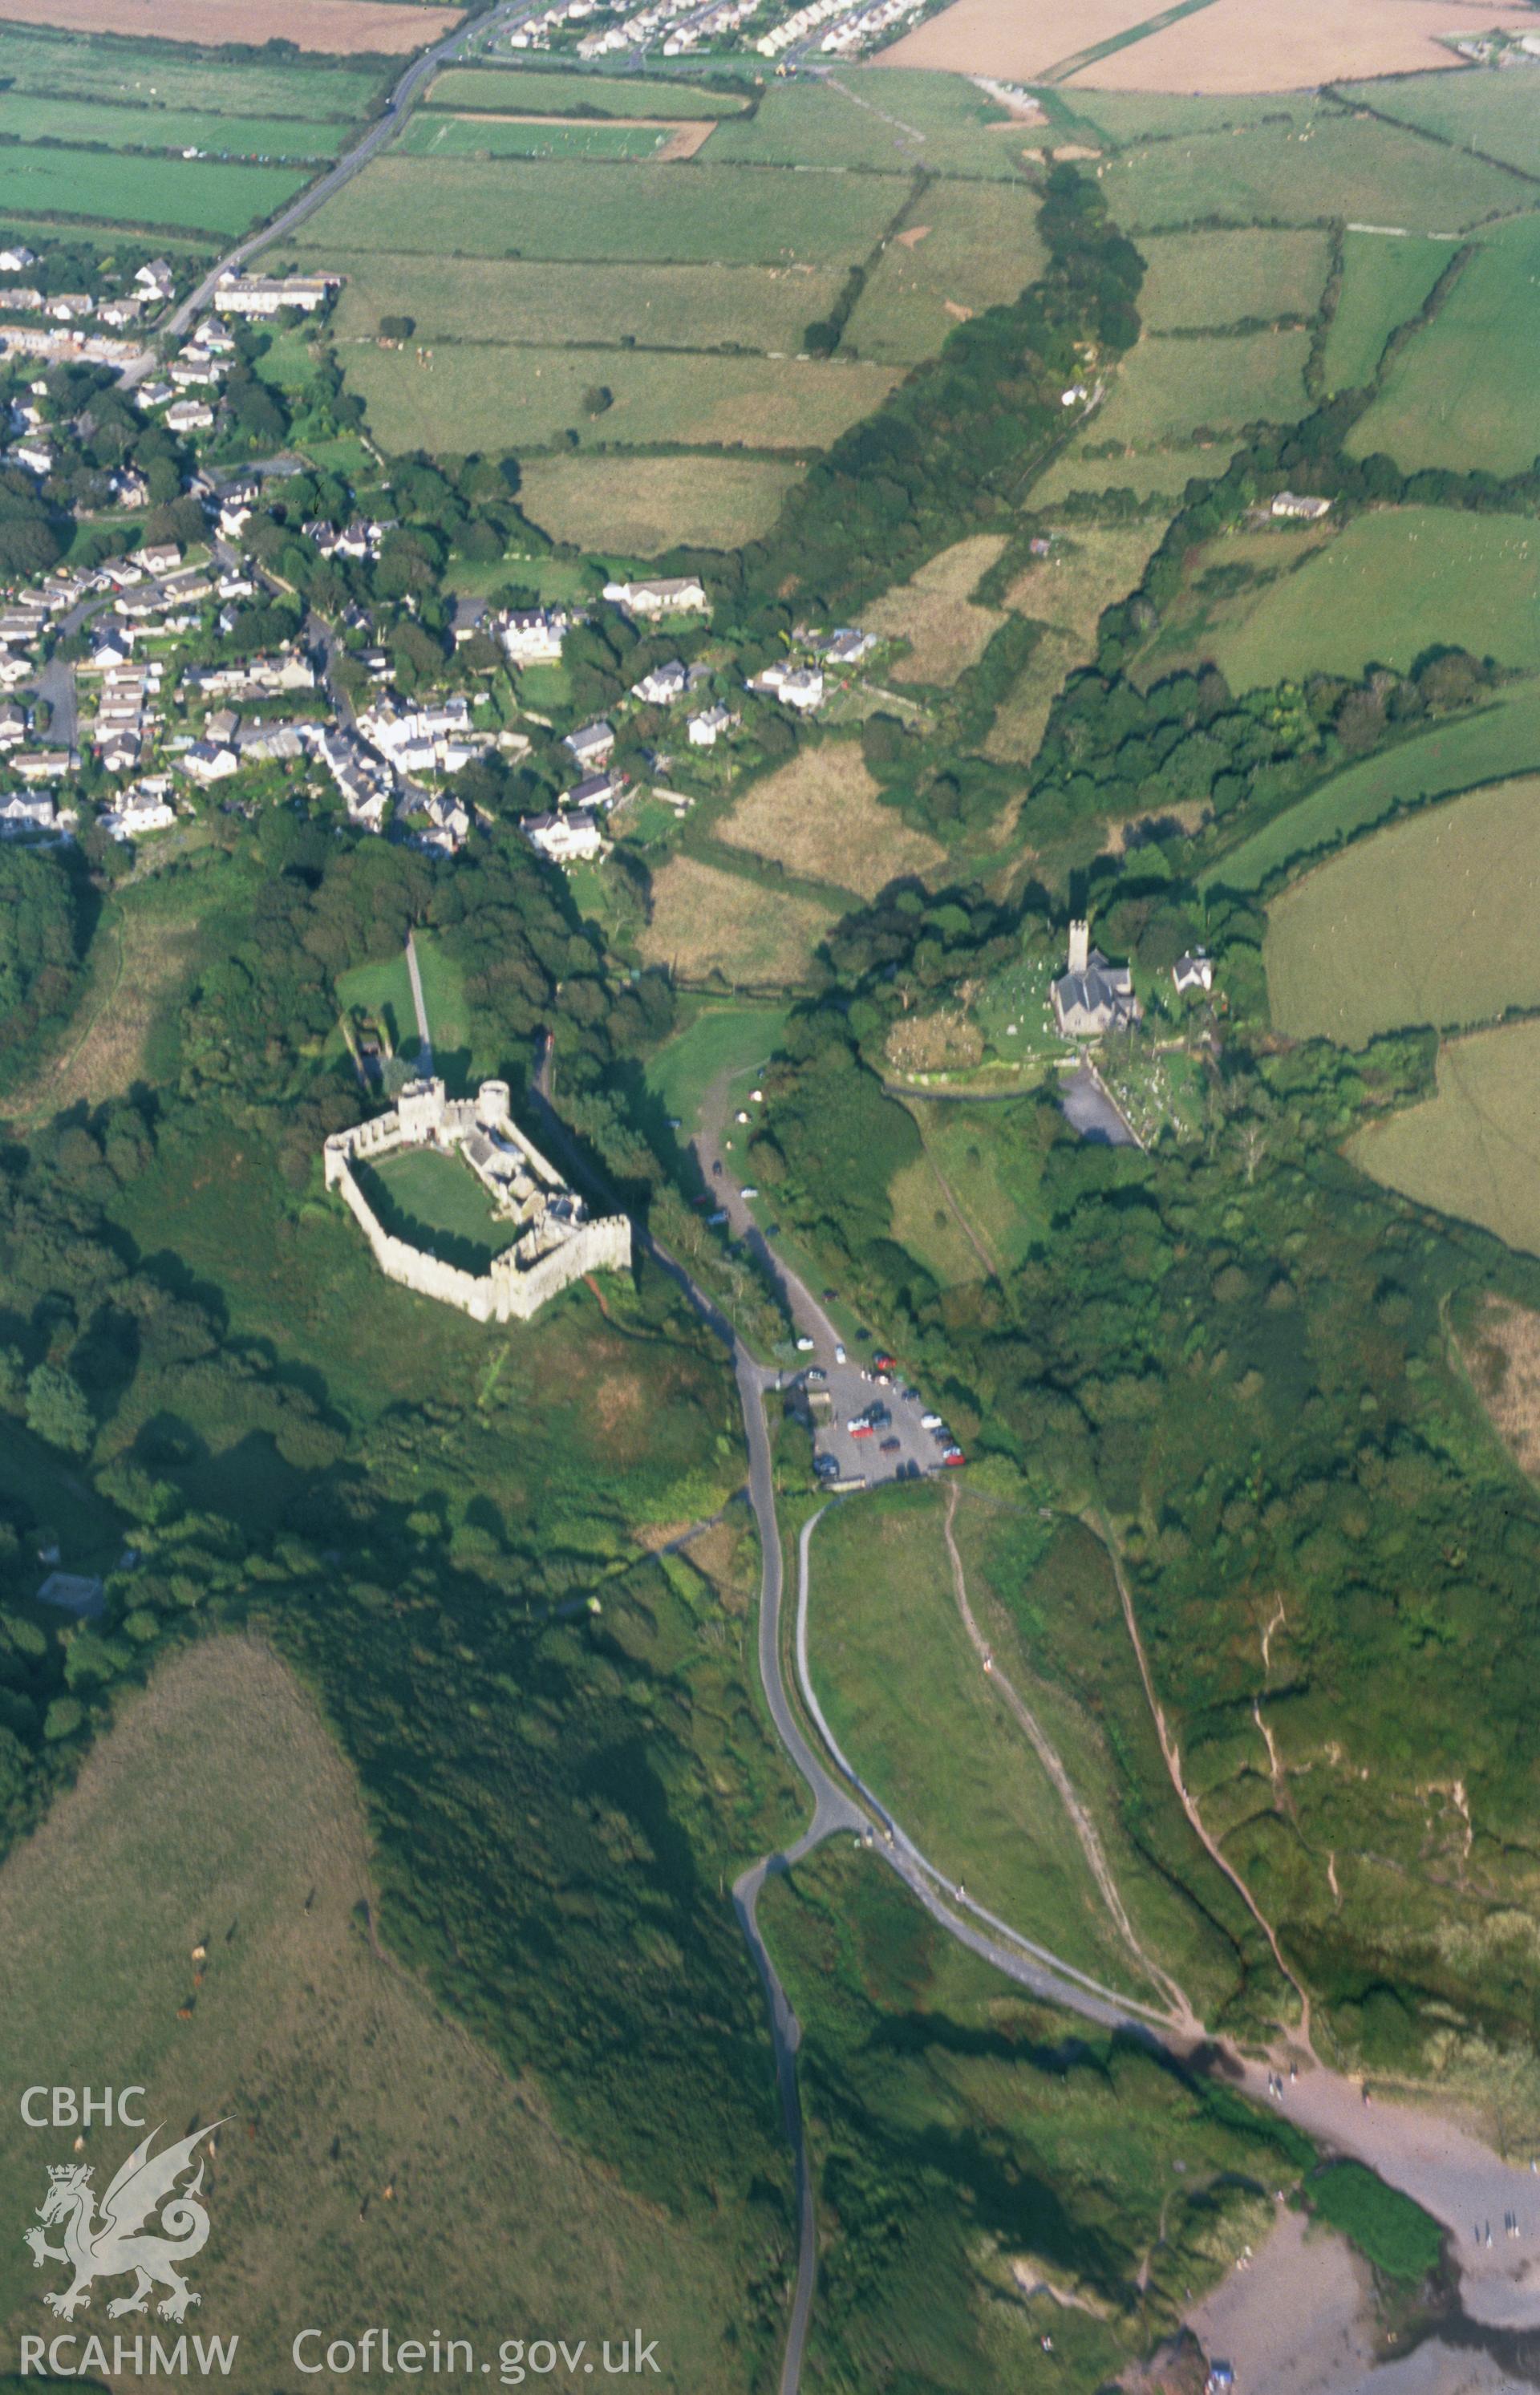 RCAHMW colour slide oblique aerial photograph of Manorbier Castle, Manorbier, taken by T.G.Driver on the 23/08/2000